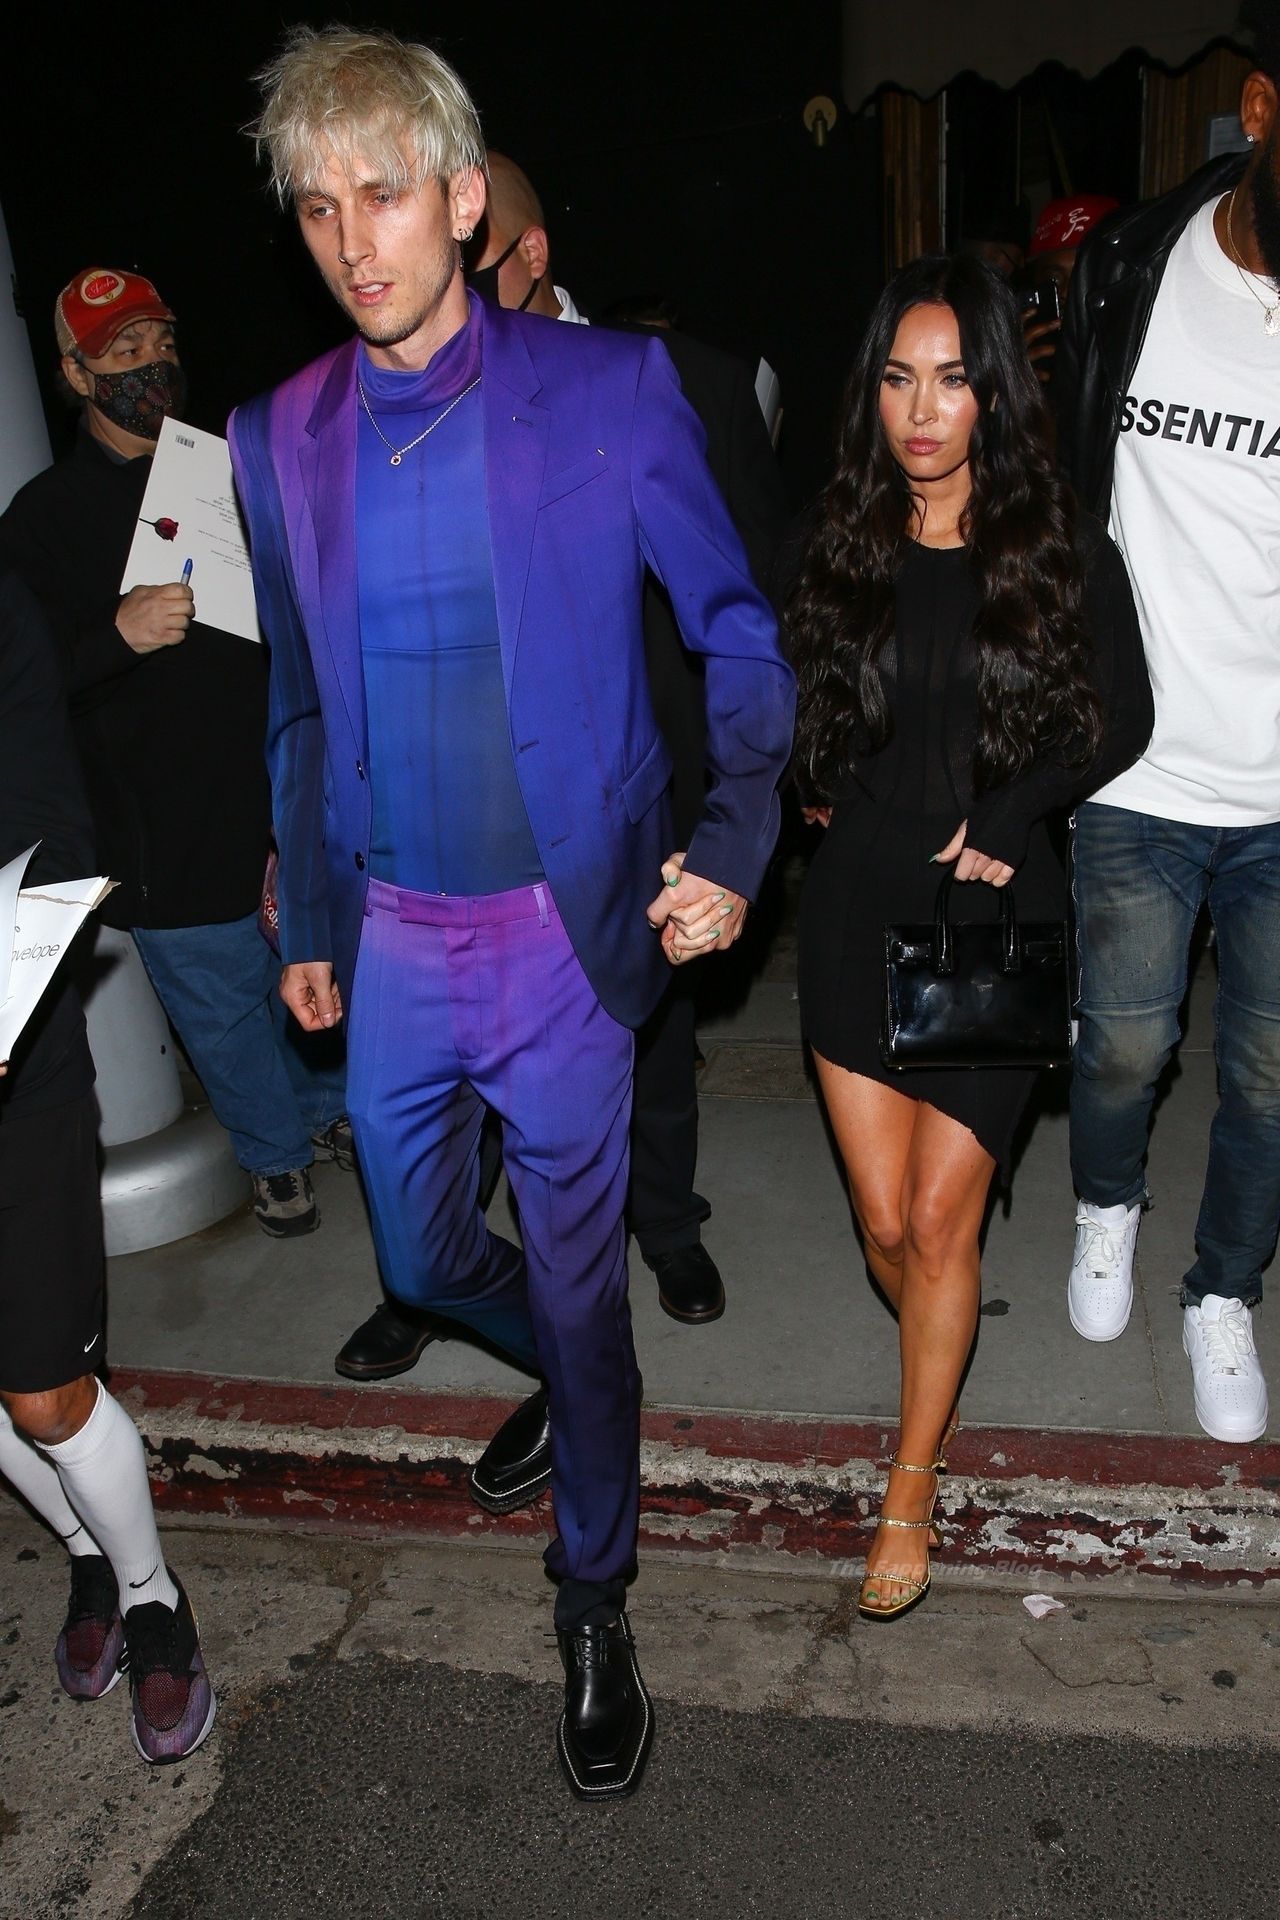 Megan Fox & MGK are Seen Leaving an Event at The Nice Guy (70 Photos)